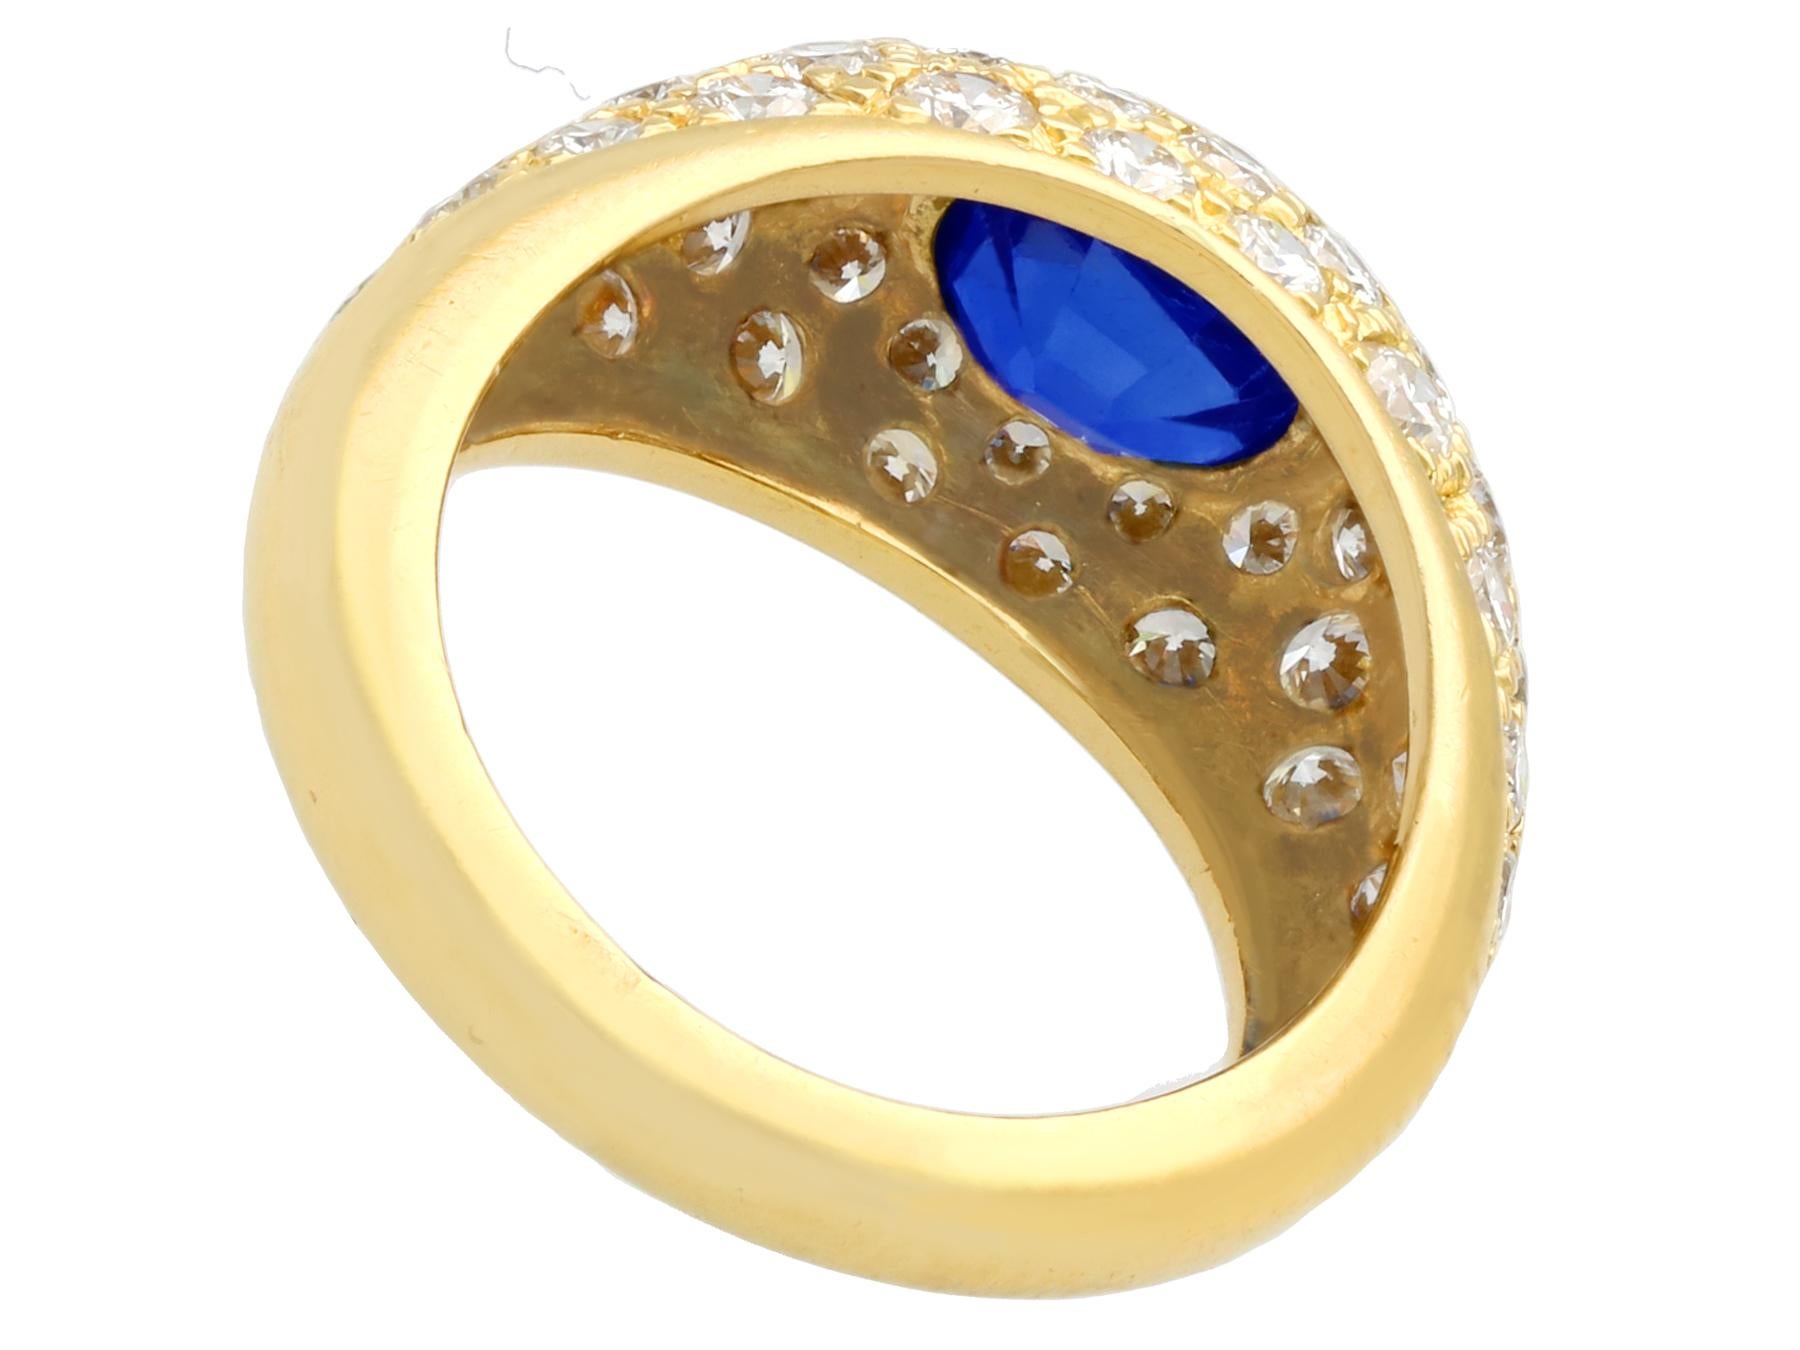 1.60 Carat Oval Cut Sapphire 1.20 Carat Diamond 18k Yellow Gold Cocktail Ring In Excellent Condition For Sale In Jesmond, Newcastle Upon Tyne